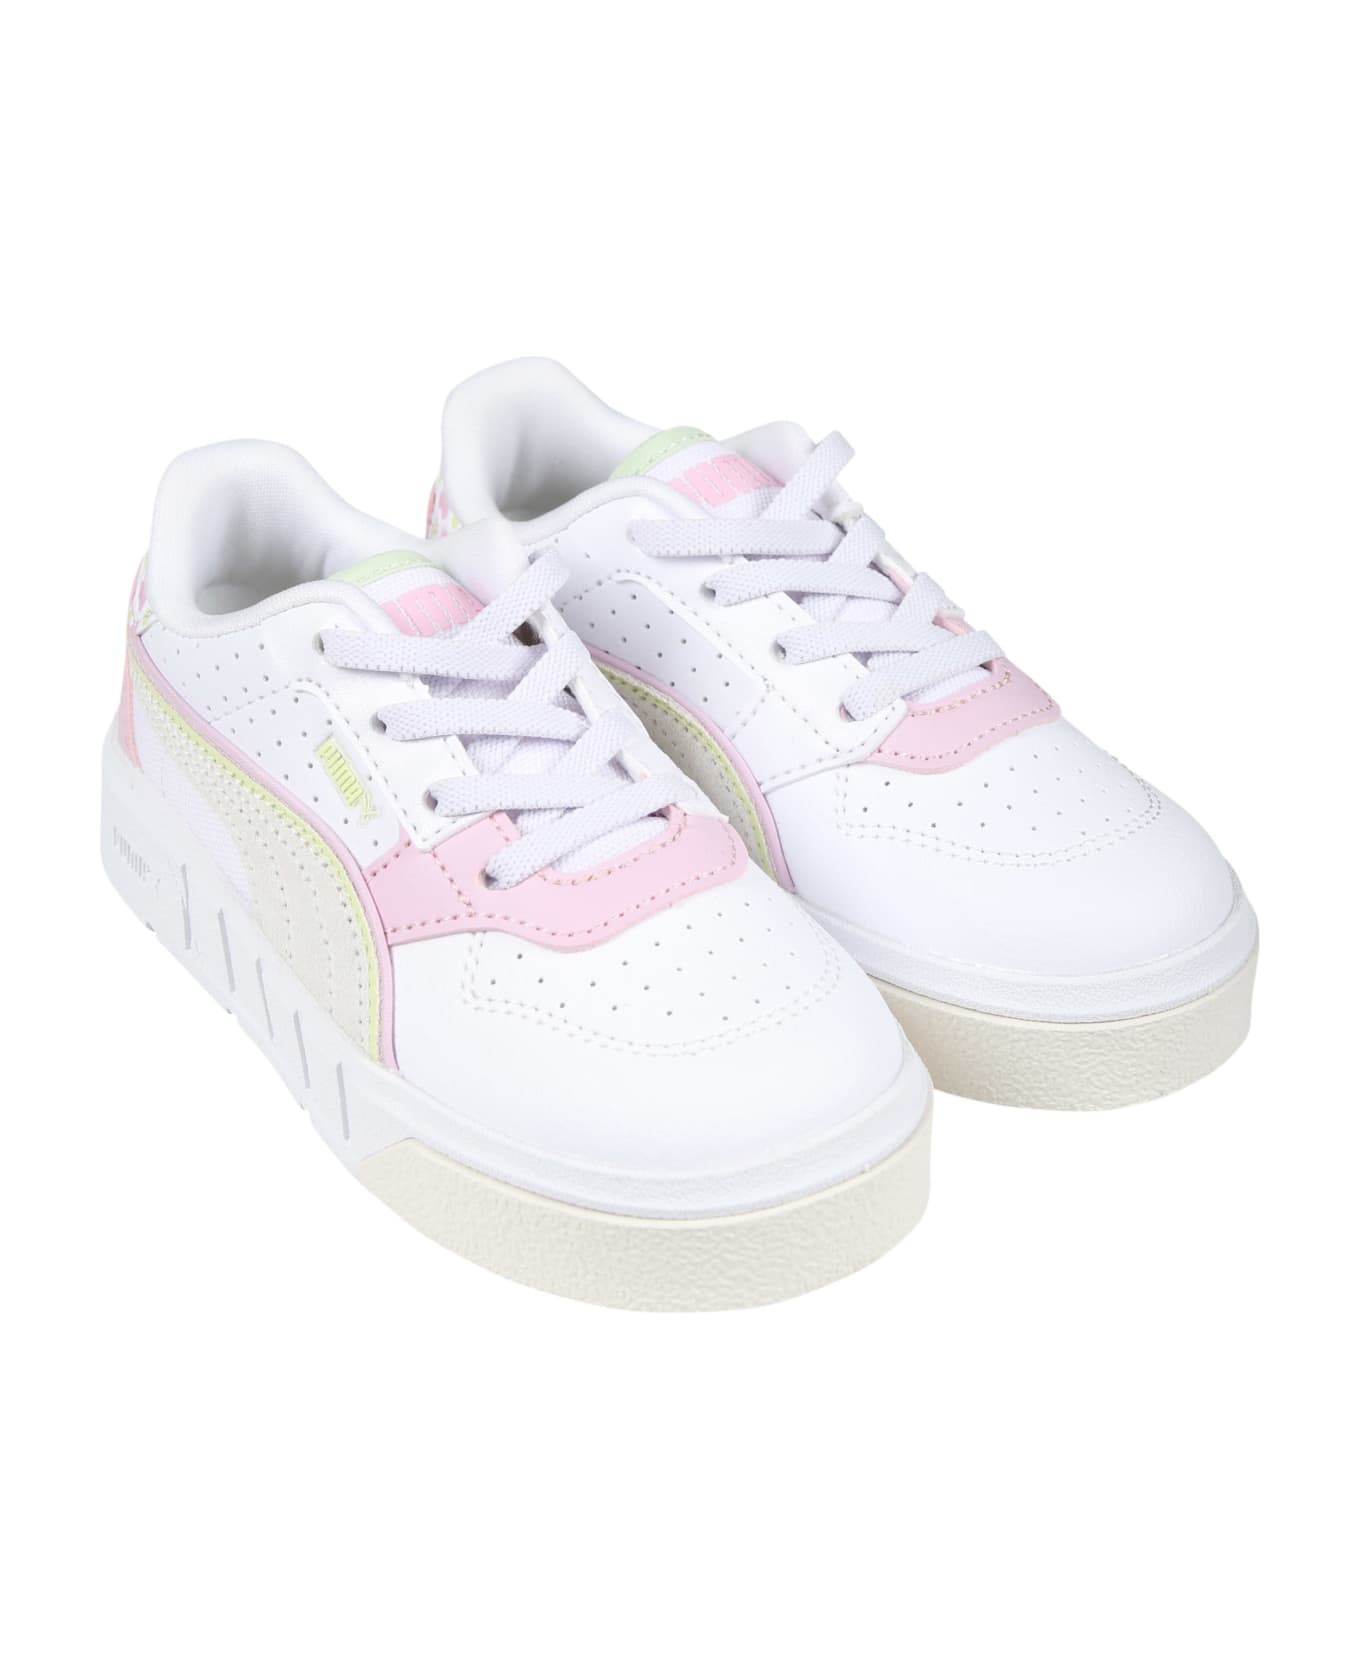 Puma Cali White Low Sneakers For Girl - White